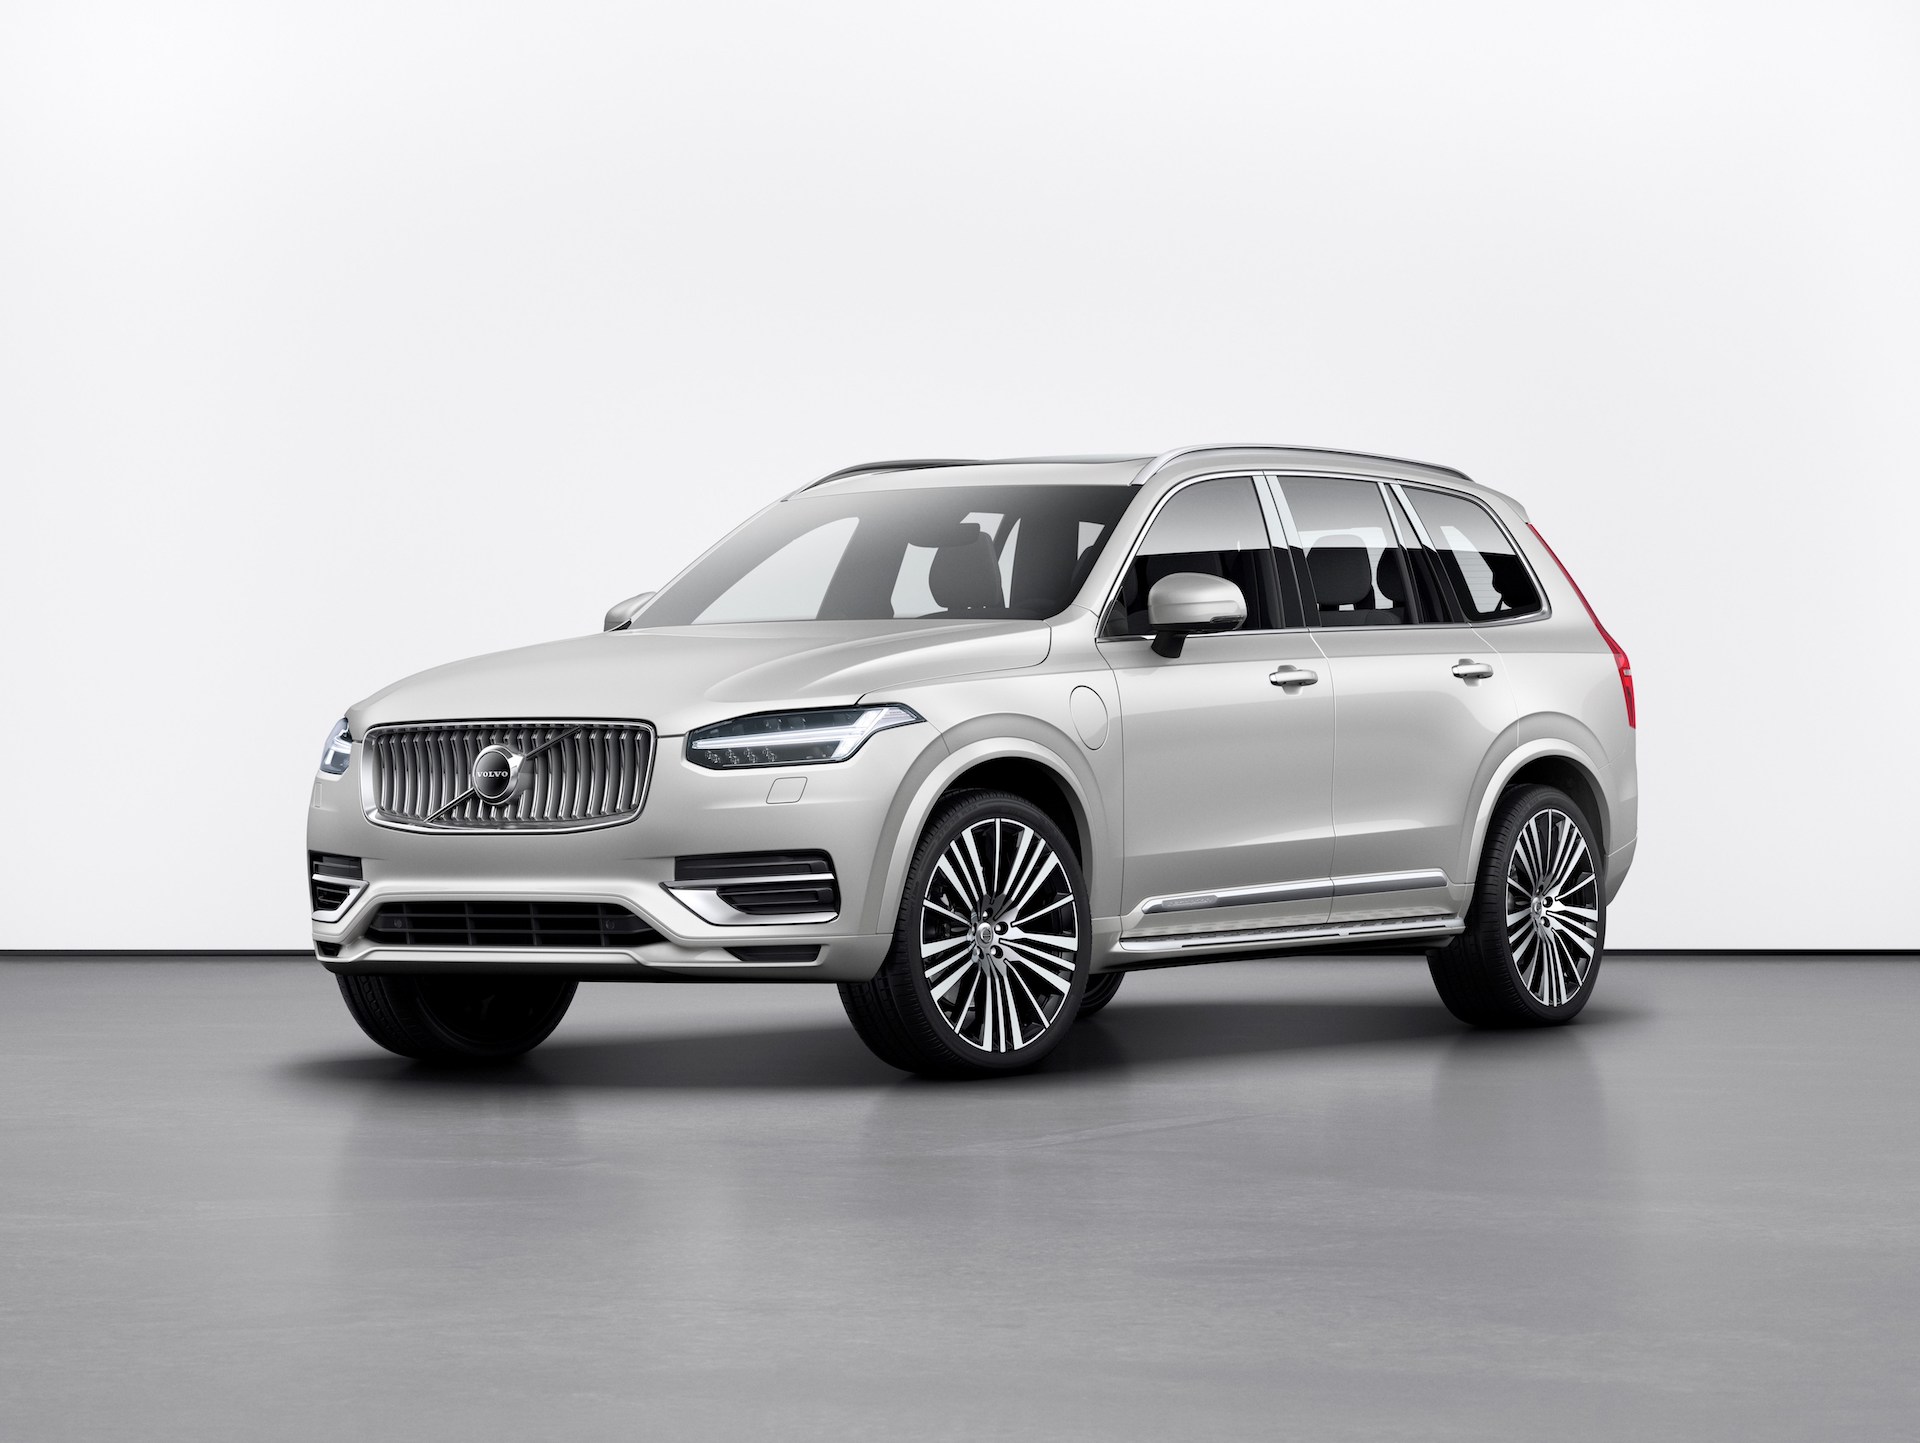 Current Volvo XC90 to remain on sale after electric successor arrives